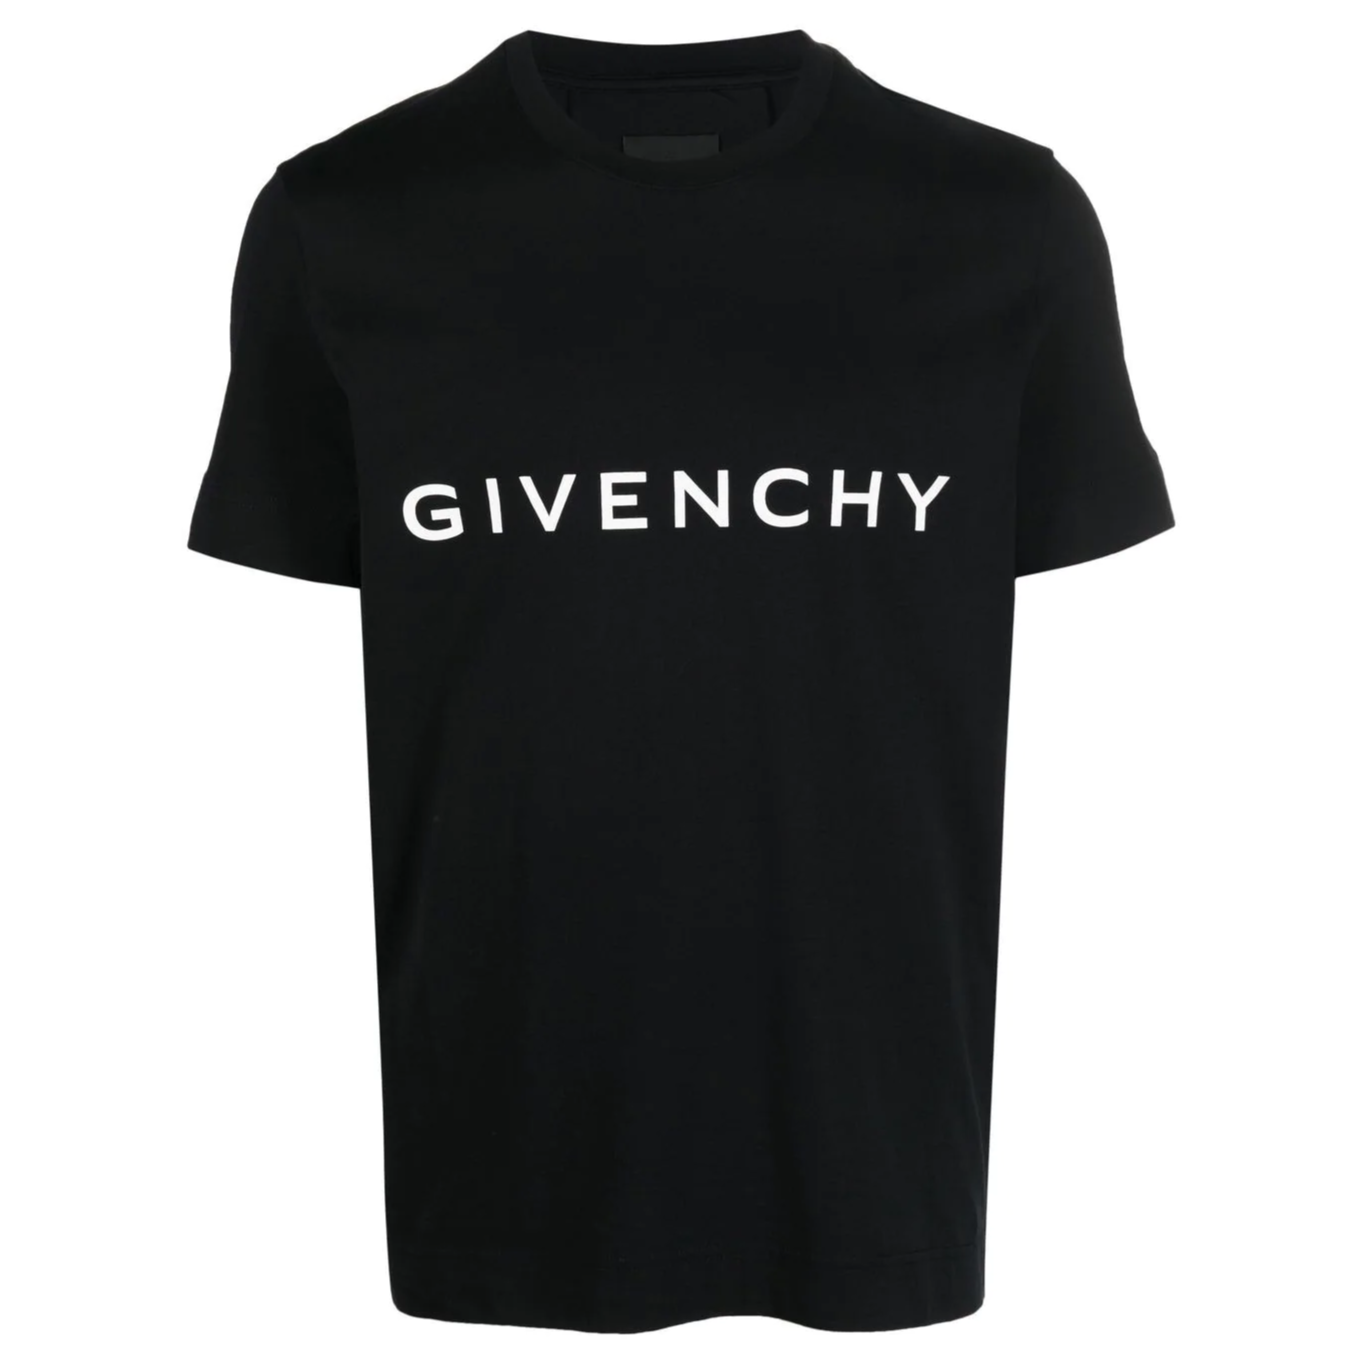 Total 53+ imagen new givenchy t shirt